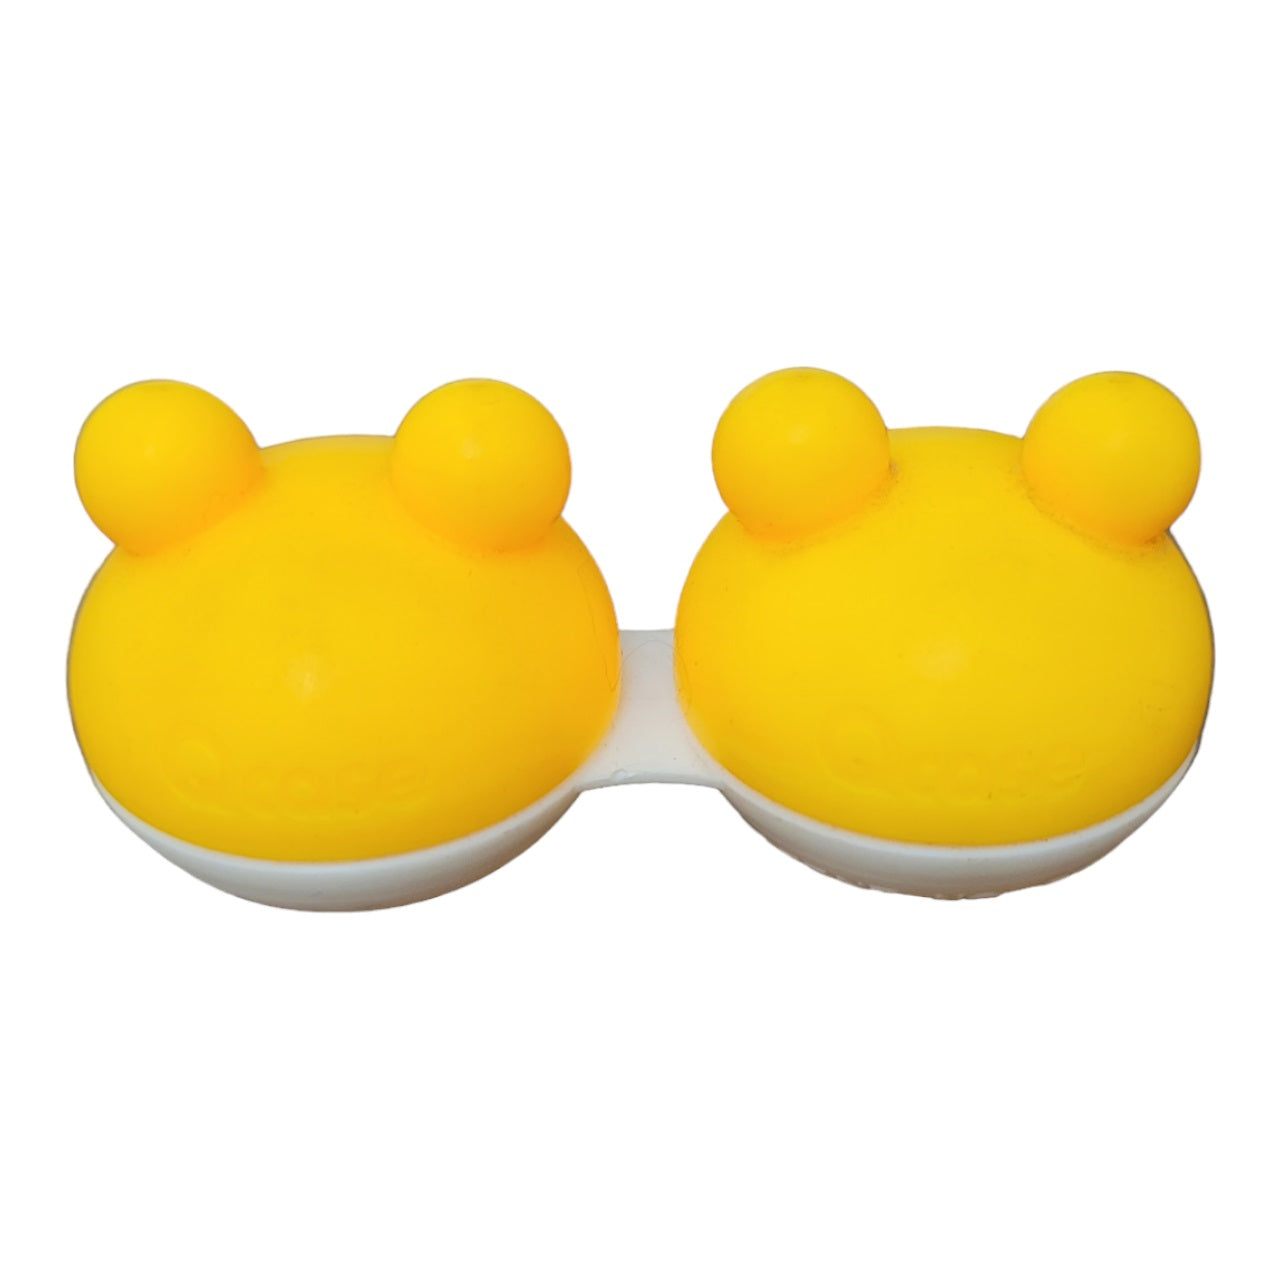 Frog Contact Lens Case | Fancy Contact Lenses Case Yellow Color by Affaires Qcase-0047